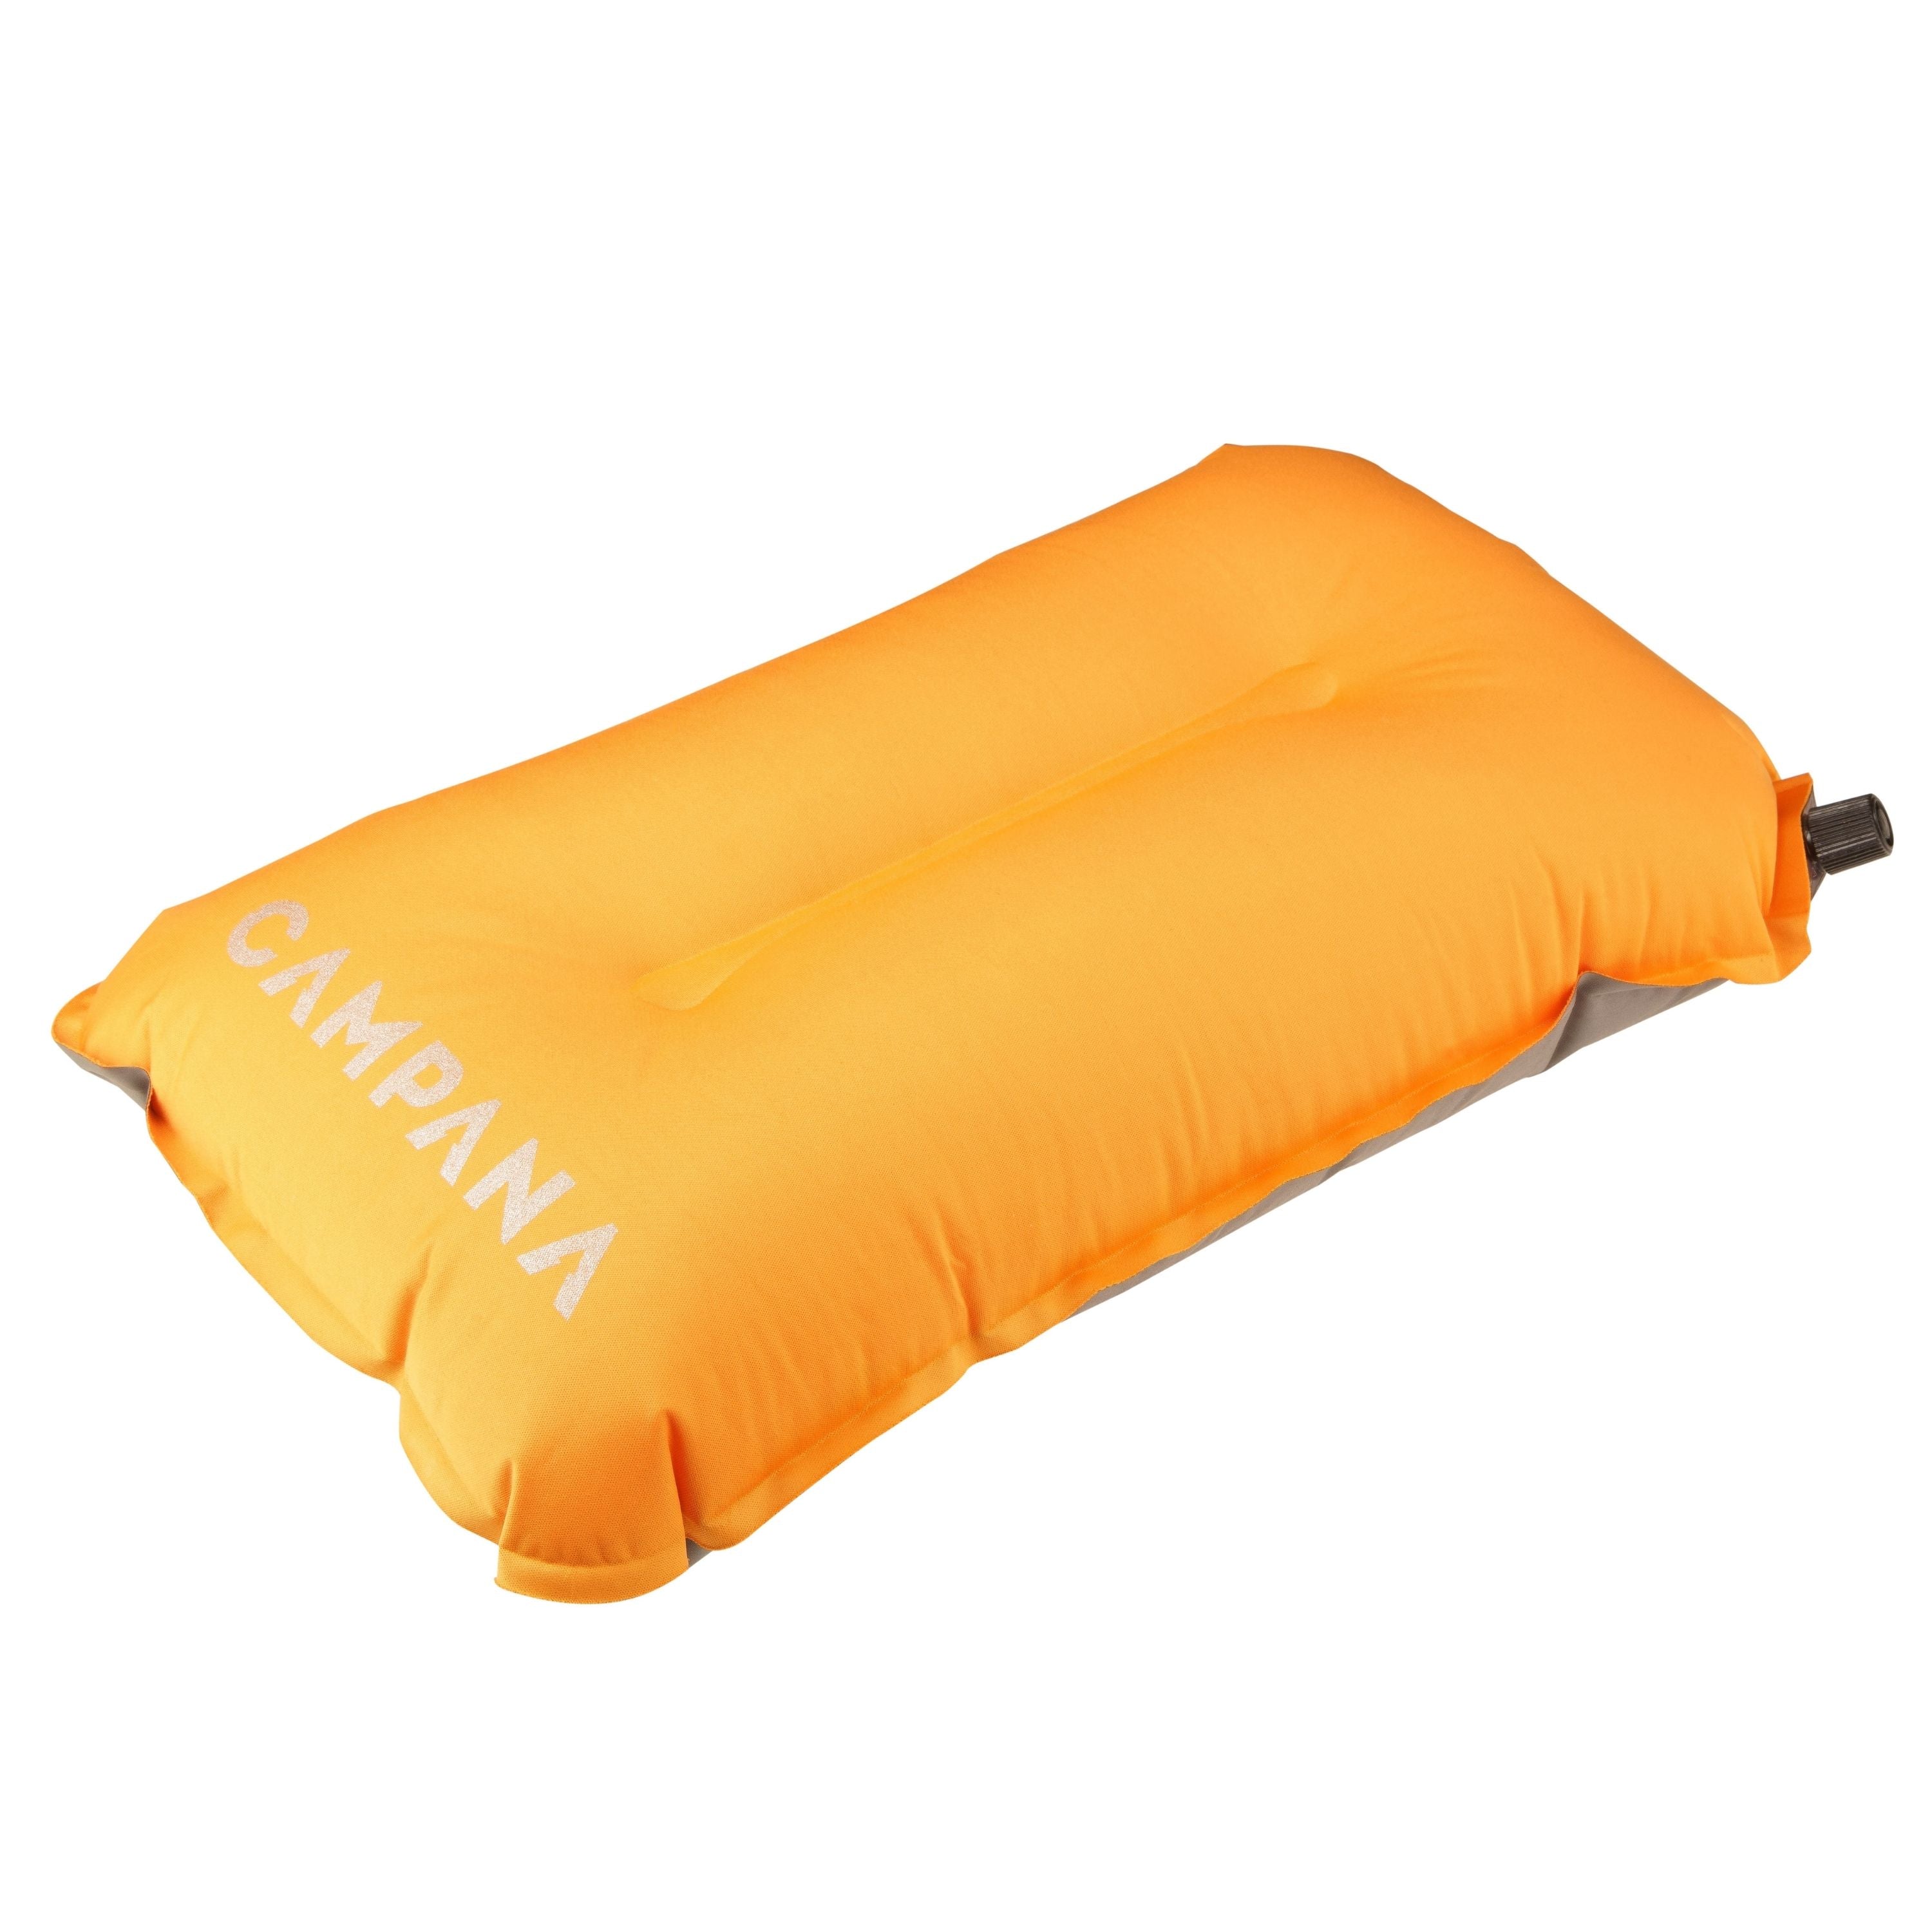 Automatic sponge inflatable air pillow